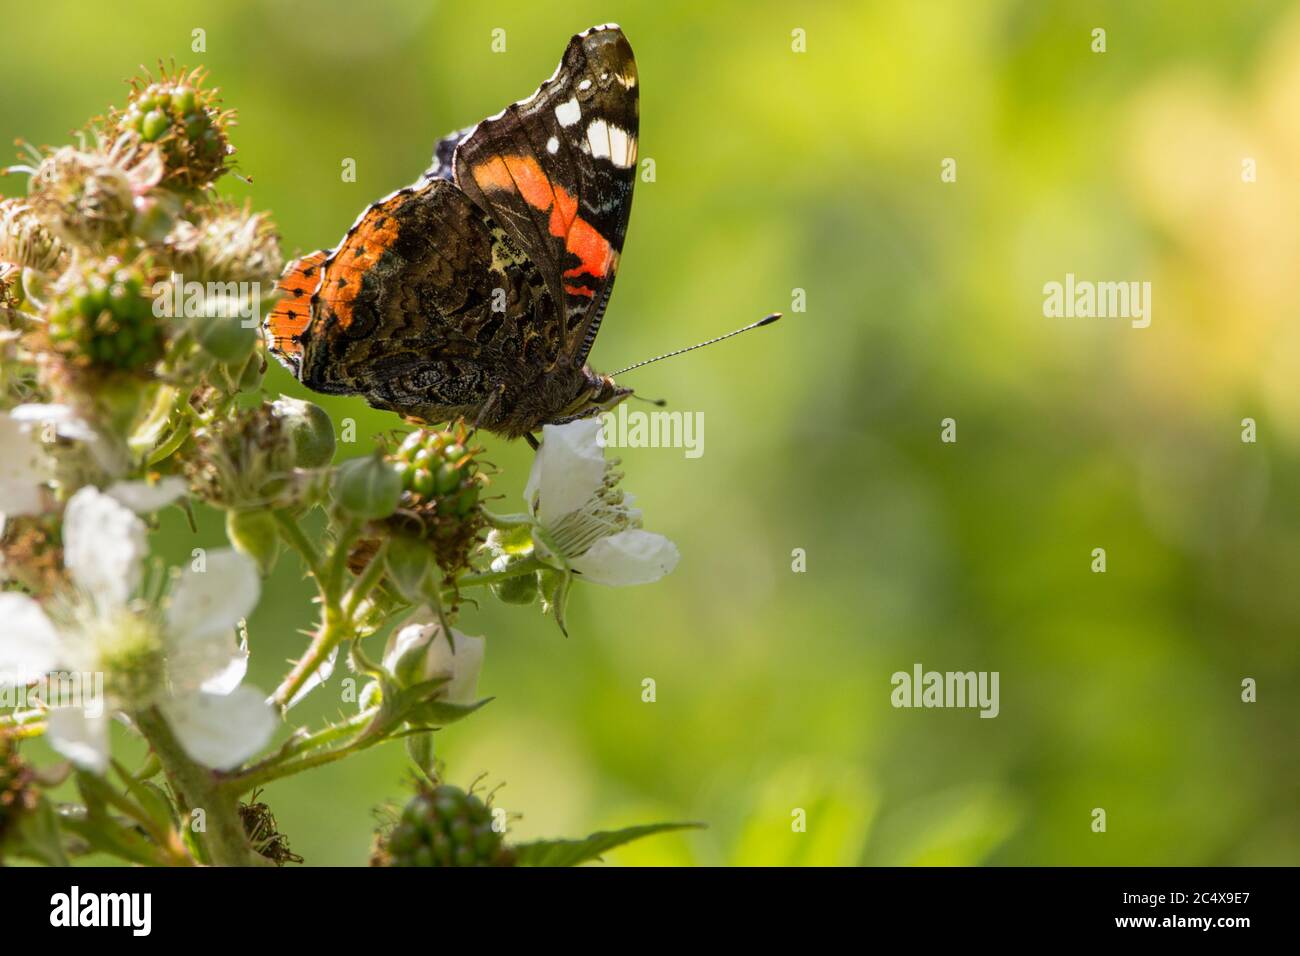 Red admiral butterfly (Vanessa atalanta) feeding with closed wings showing  underwings of marbled smoky grey red bands and white spots. Stock Photo